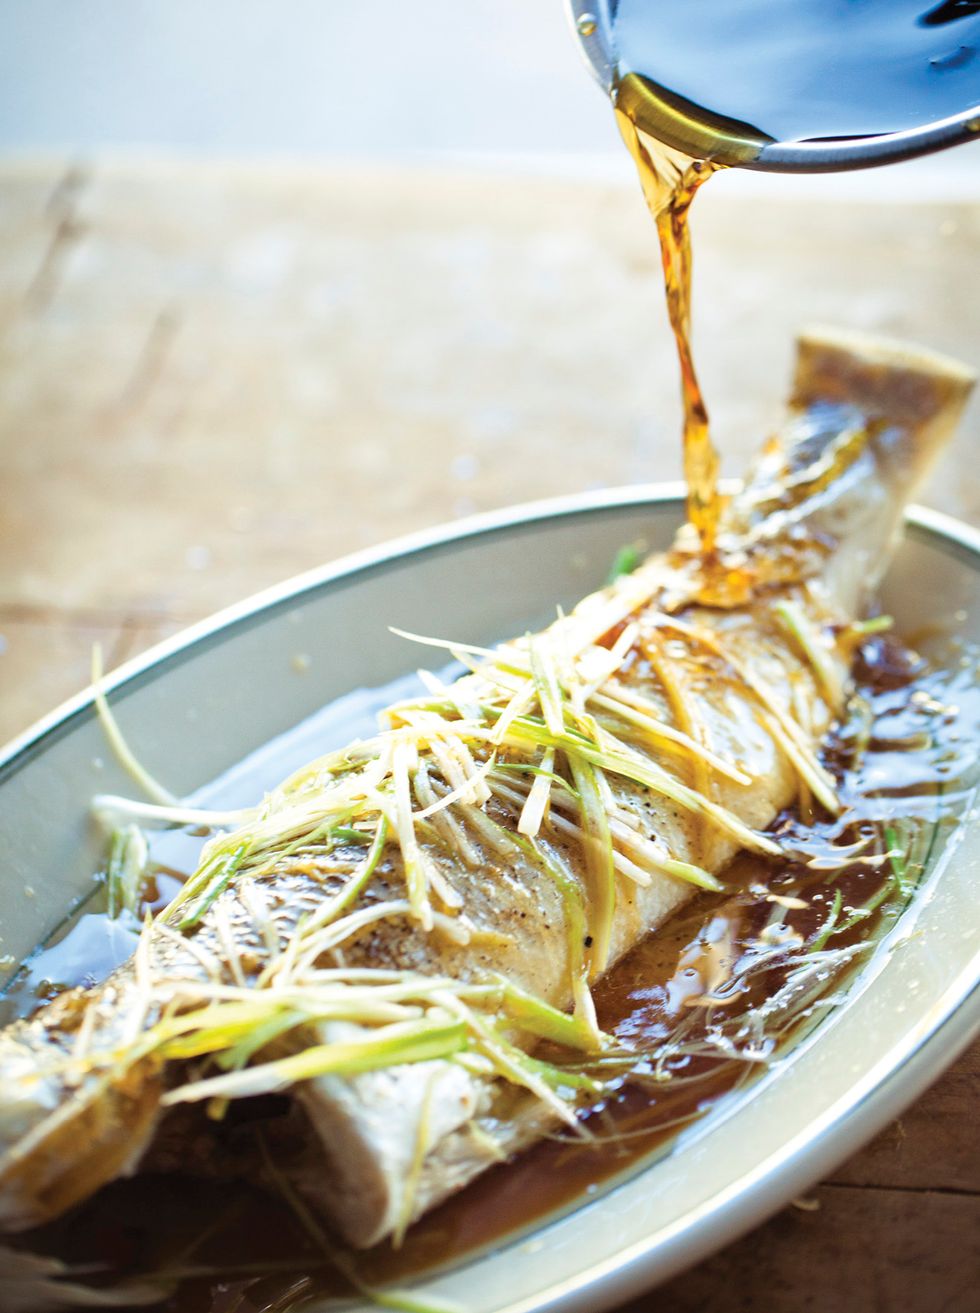 Charles Phan's Steamed Whole Fish with Ginger, Scallions, and Soy Recipe